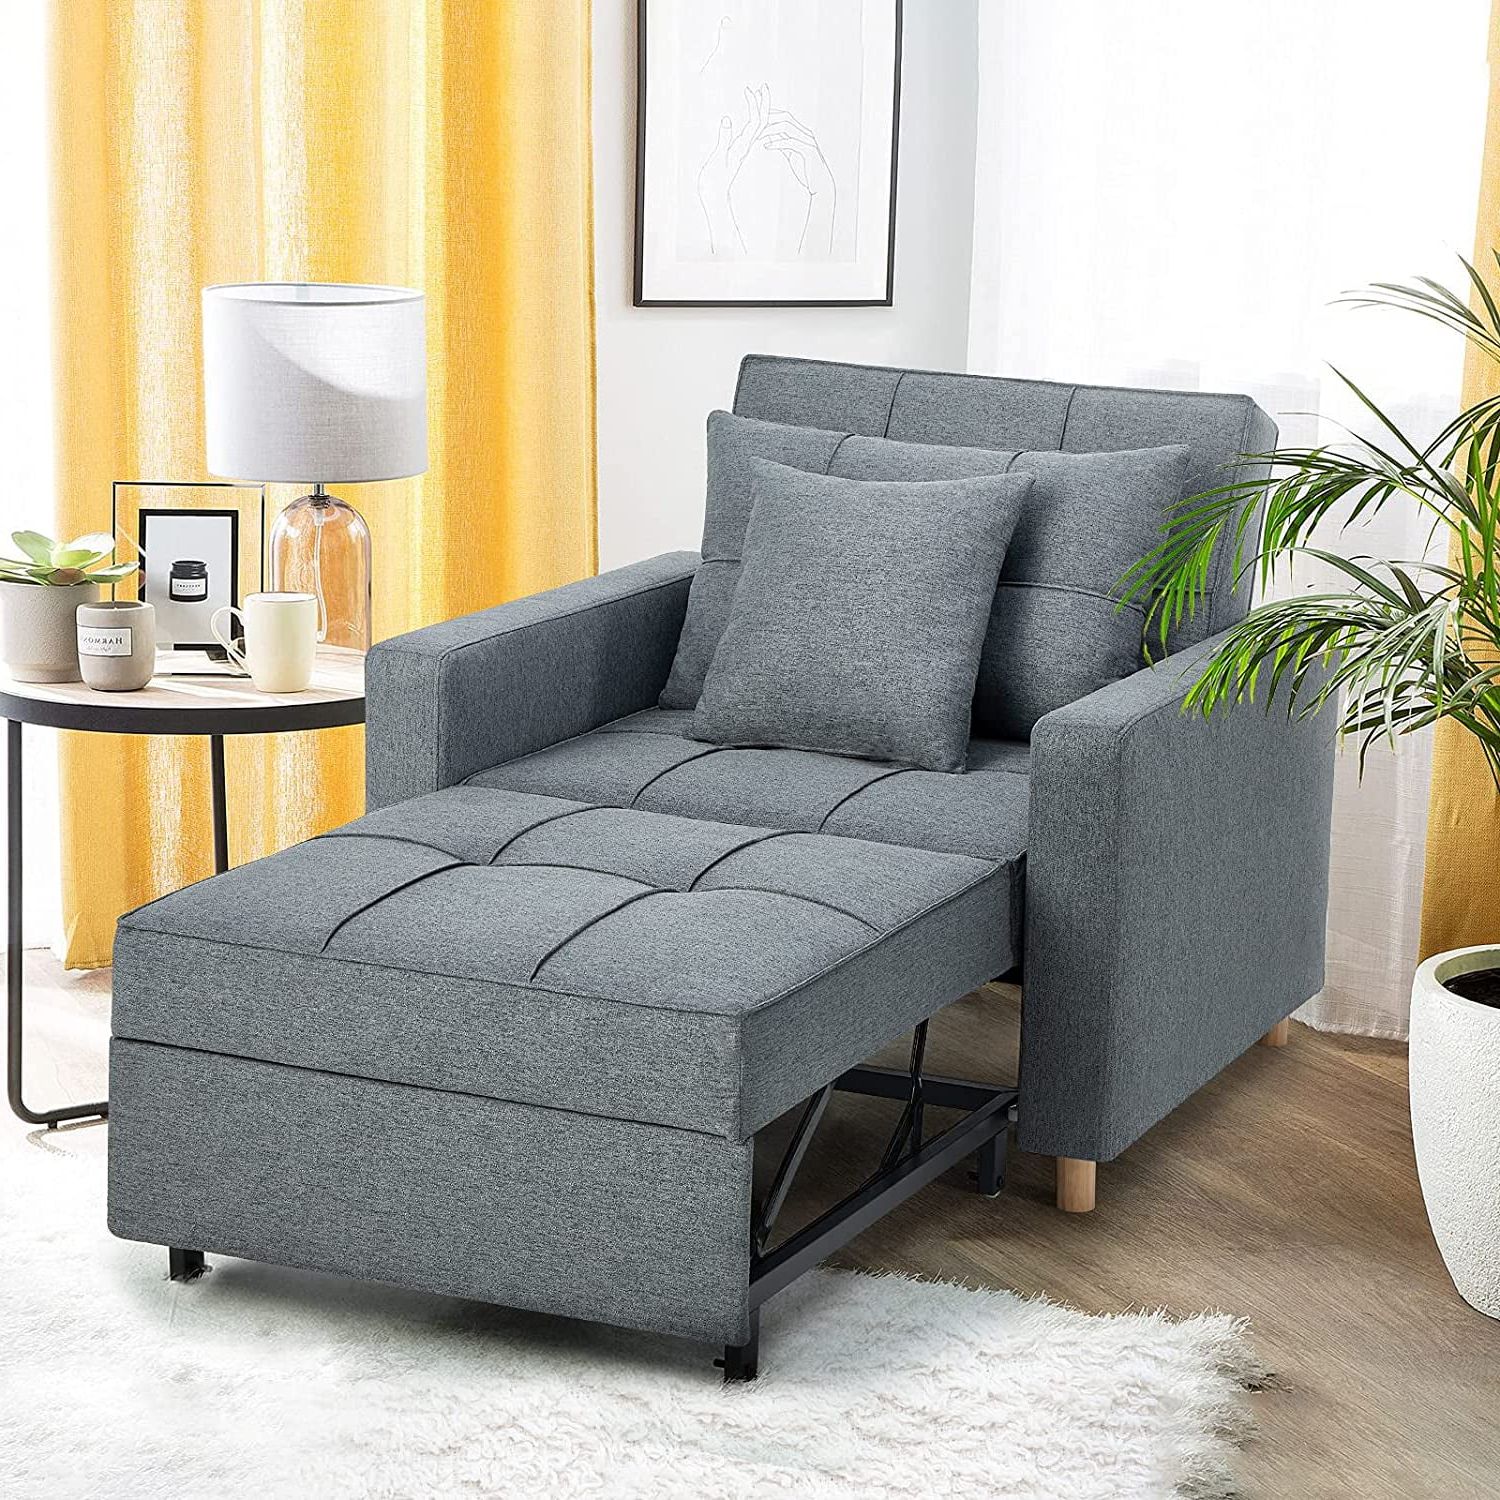 Favorite 3 In 1 Gray Pull Out Sleeper Sofas Throughout Yodolla 3 In 1 Futon Sofa Bed Chair With Adjustable Backrest Into A (View 2 of 15)